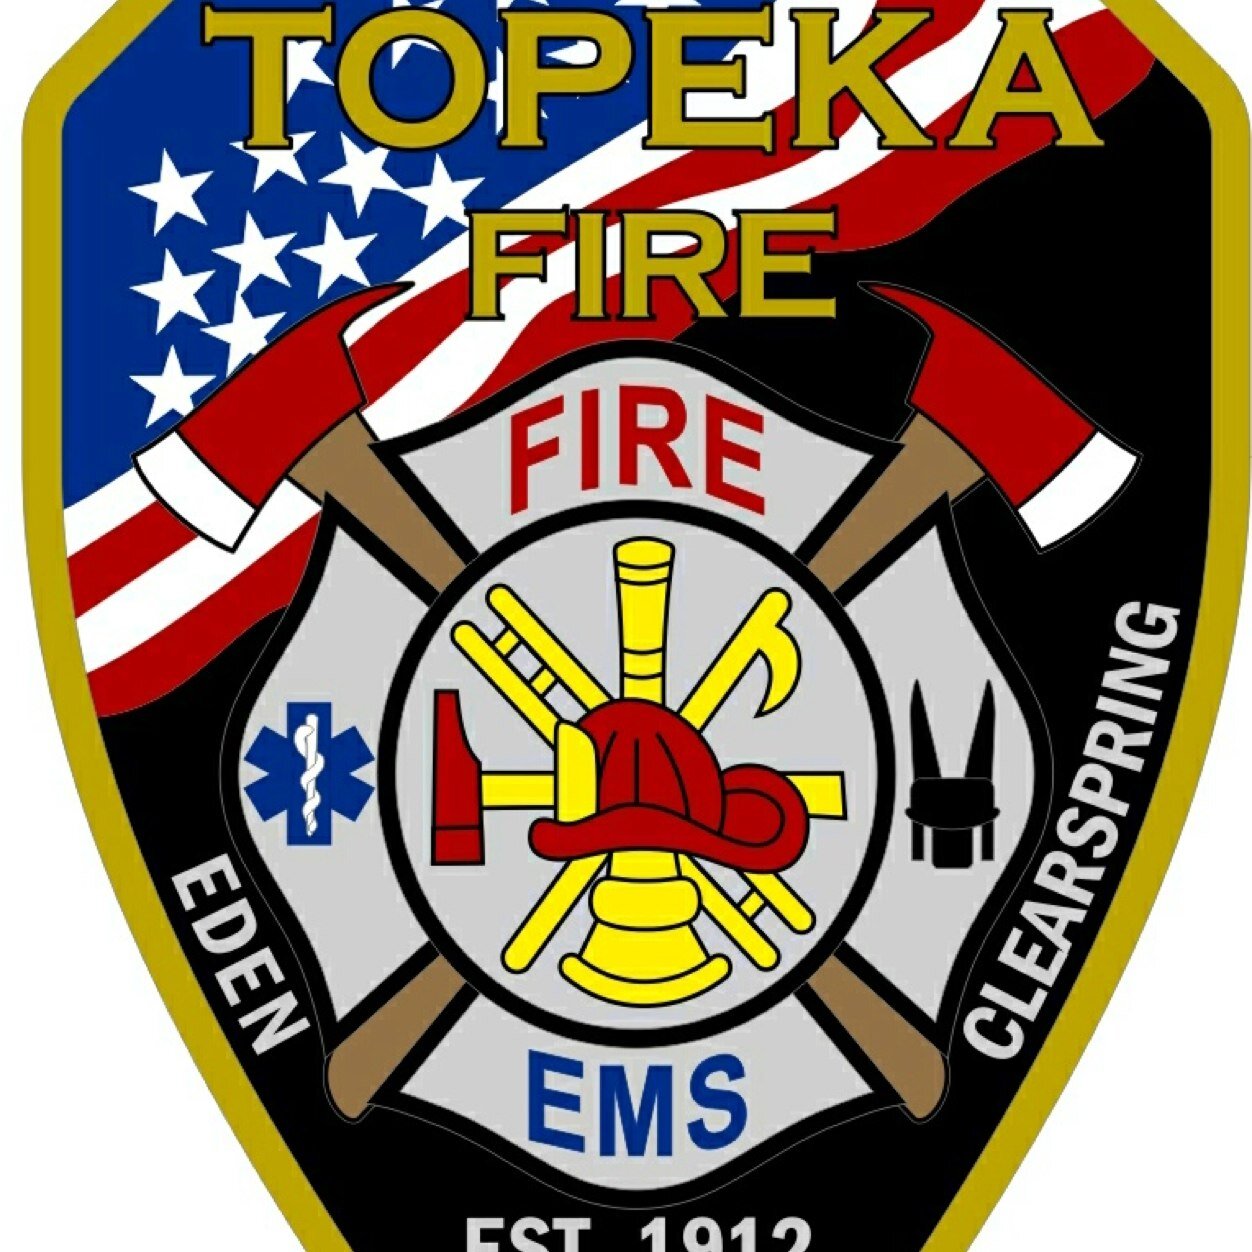 The Fire Department provides Fire, Rescue, Medical and Inspections. Protecting 80 square miles of LaGrange County including Eden and Clearspring Township.